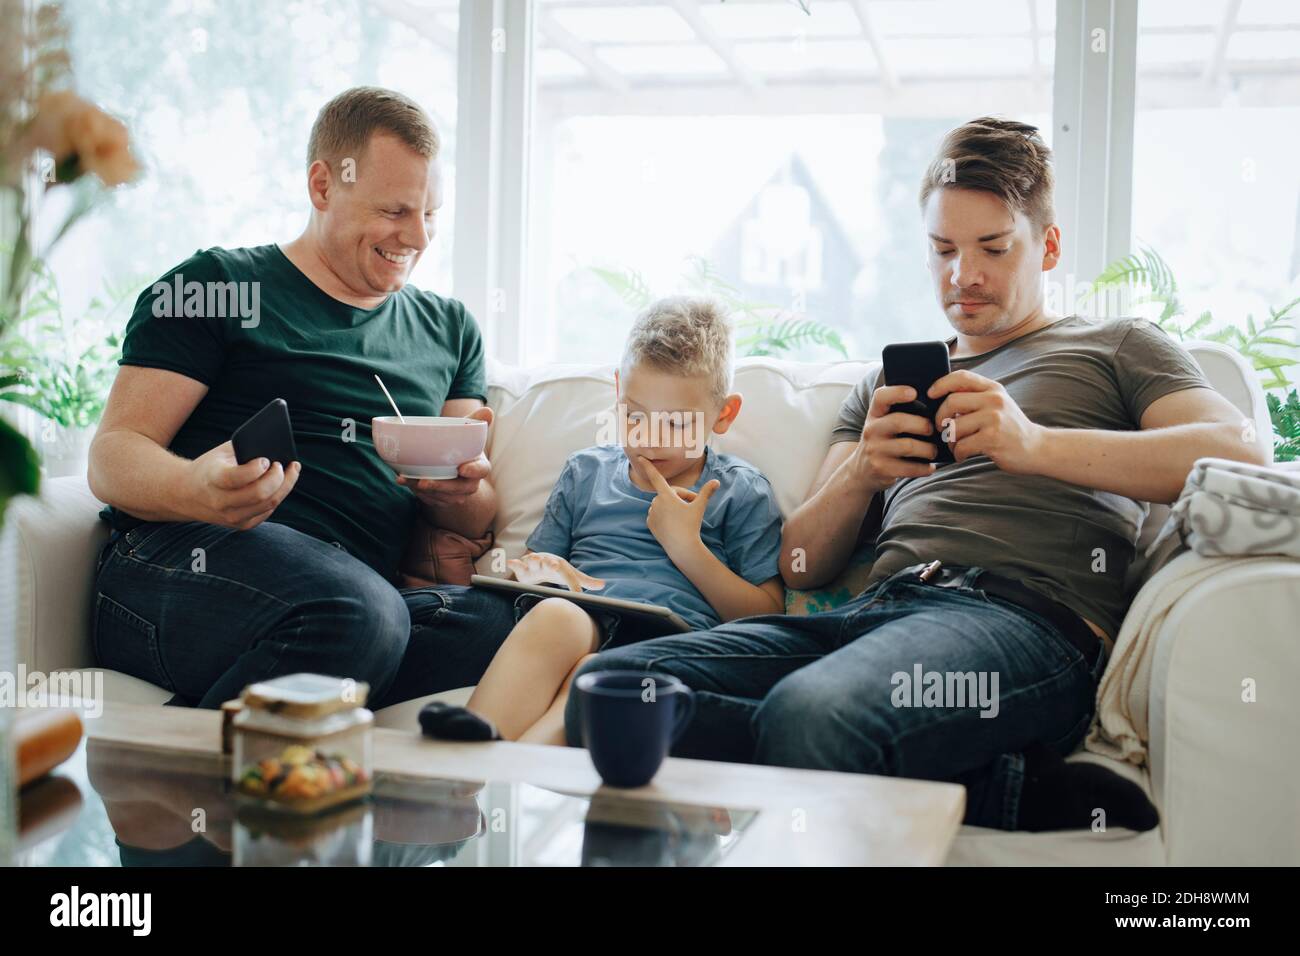 Smiling father with smart phone looking at son using digital tablet on sofa at home Stock Photo